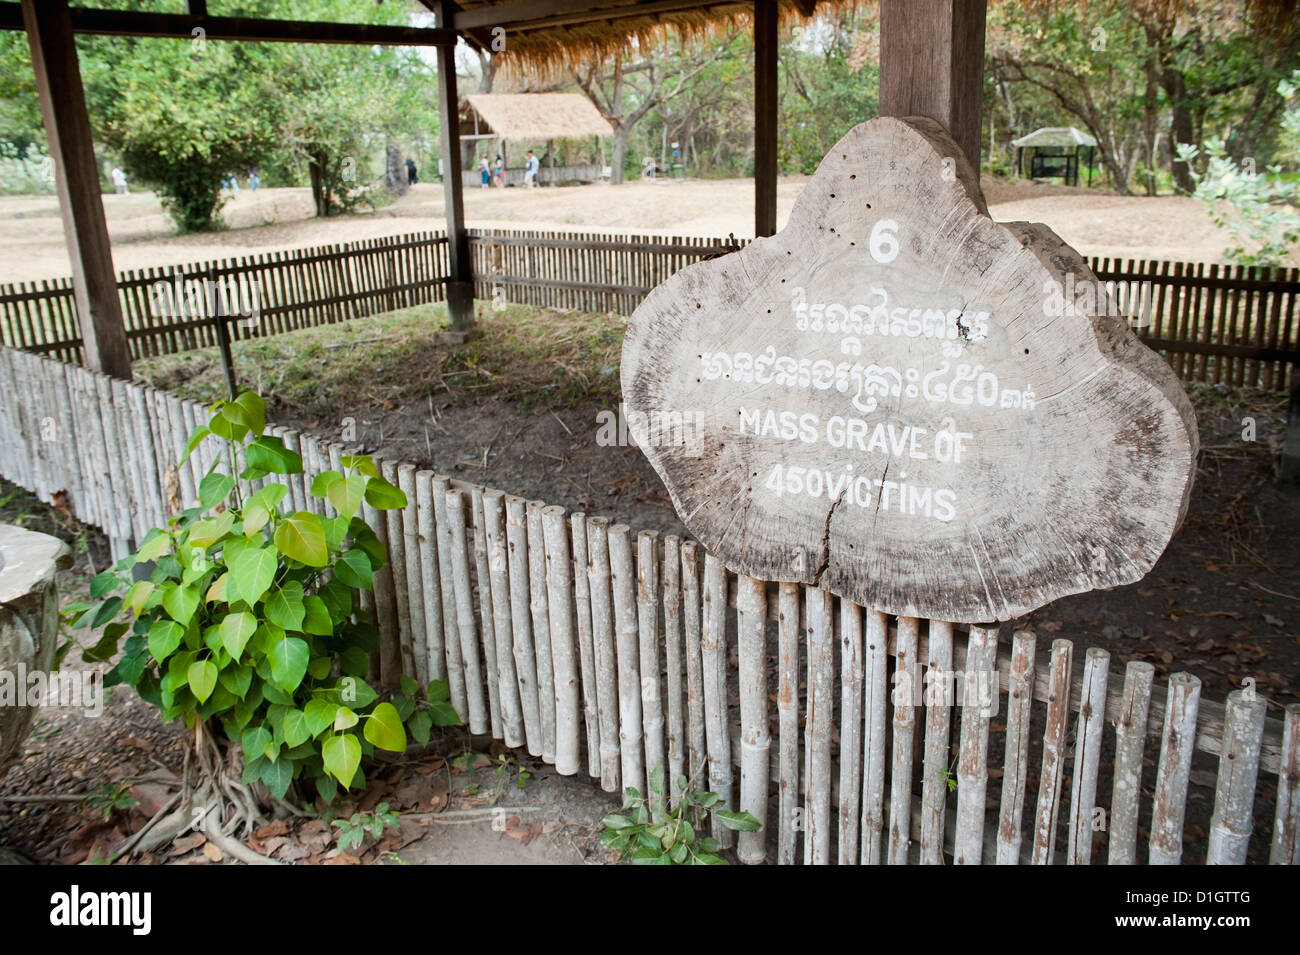 Sign reading Mass Grave of 450 Victims at The Killing Fields, Phnom Penh, Cambodia, Indochina, Southeast Asia, Asia Stock Photo